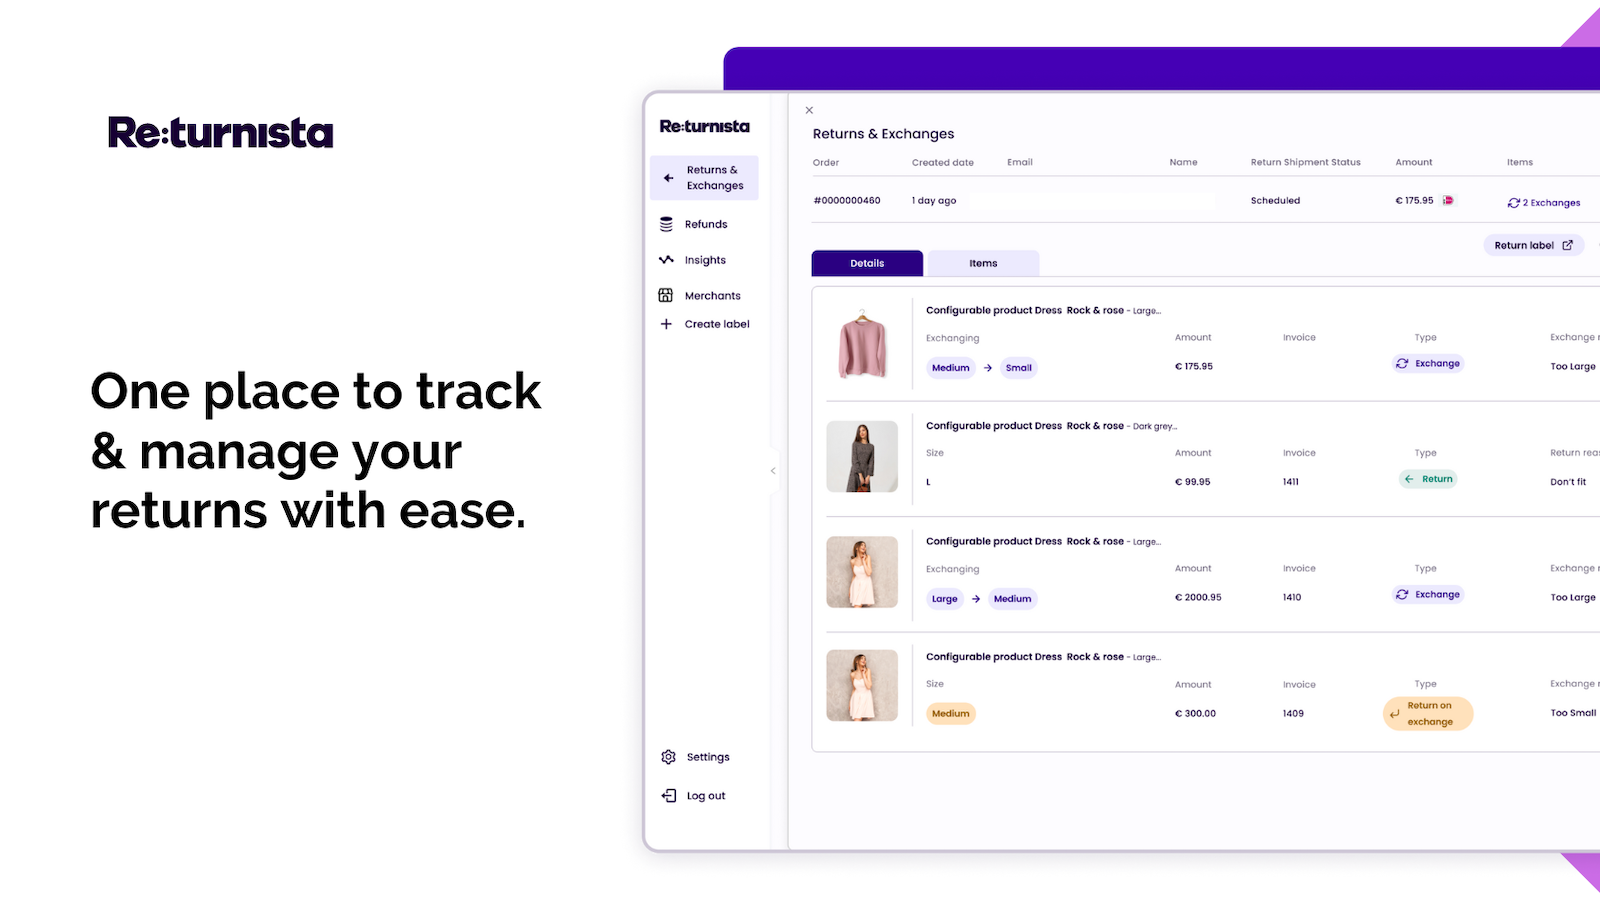 One place to track and manager your returns with ease